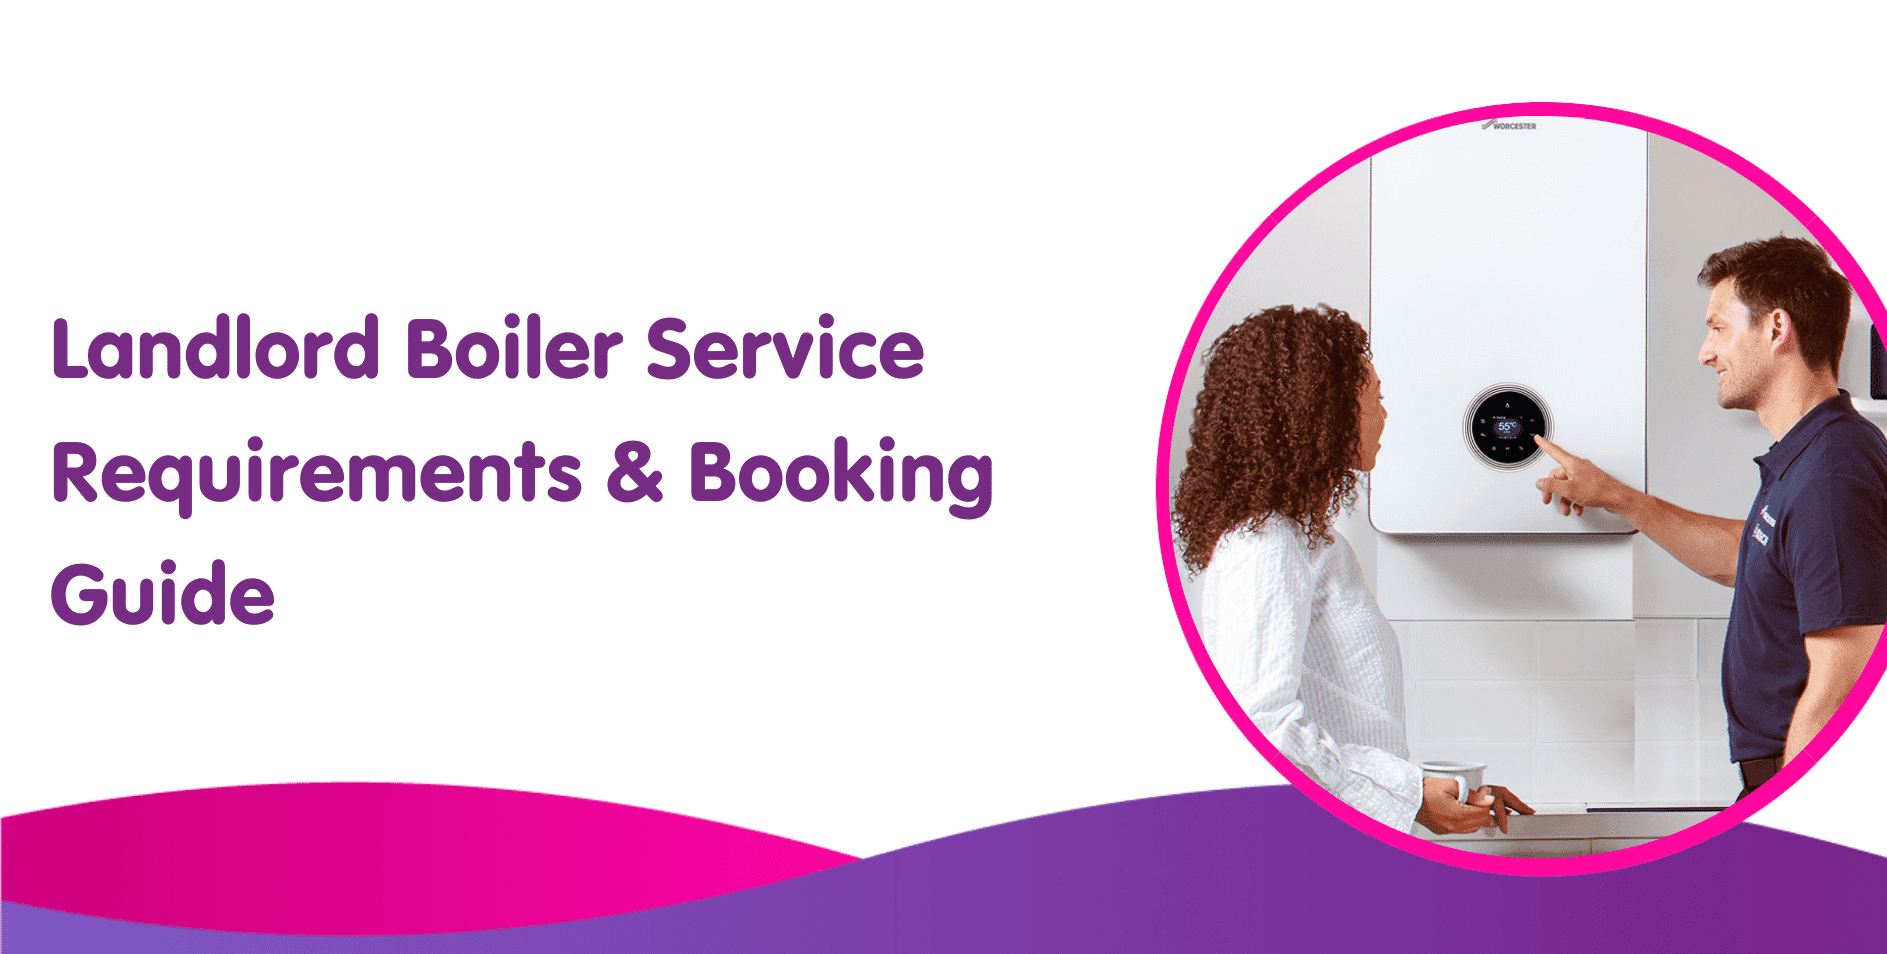 Landlord Boiler Service Requirements & Booking Guide